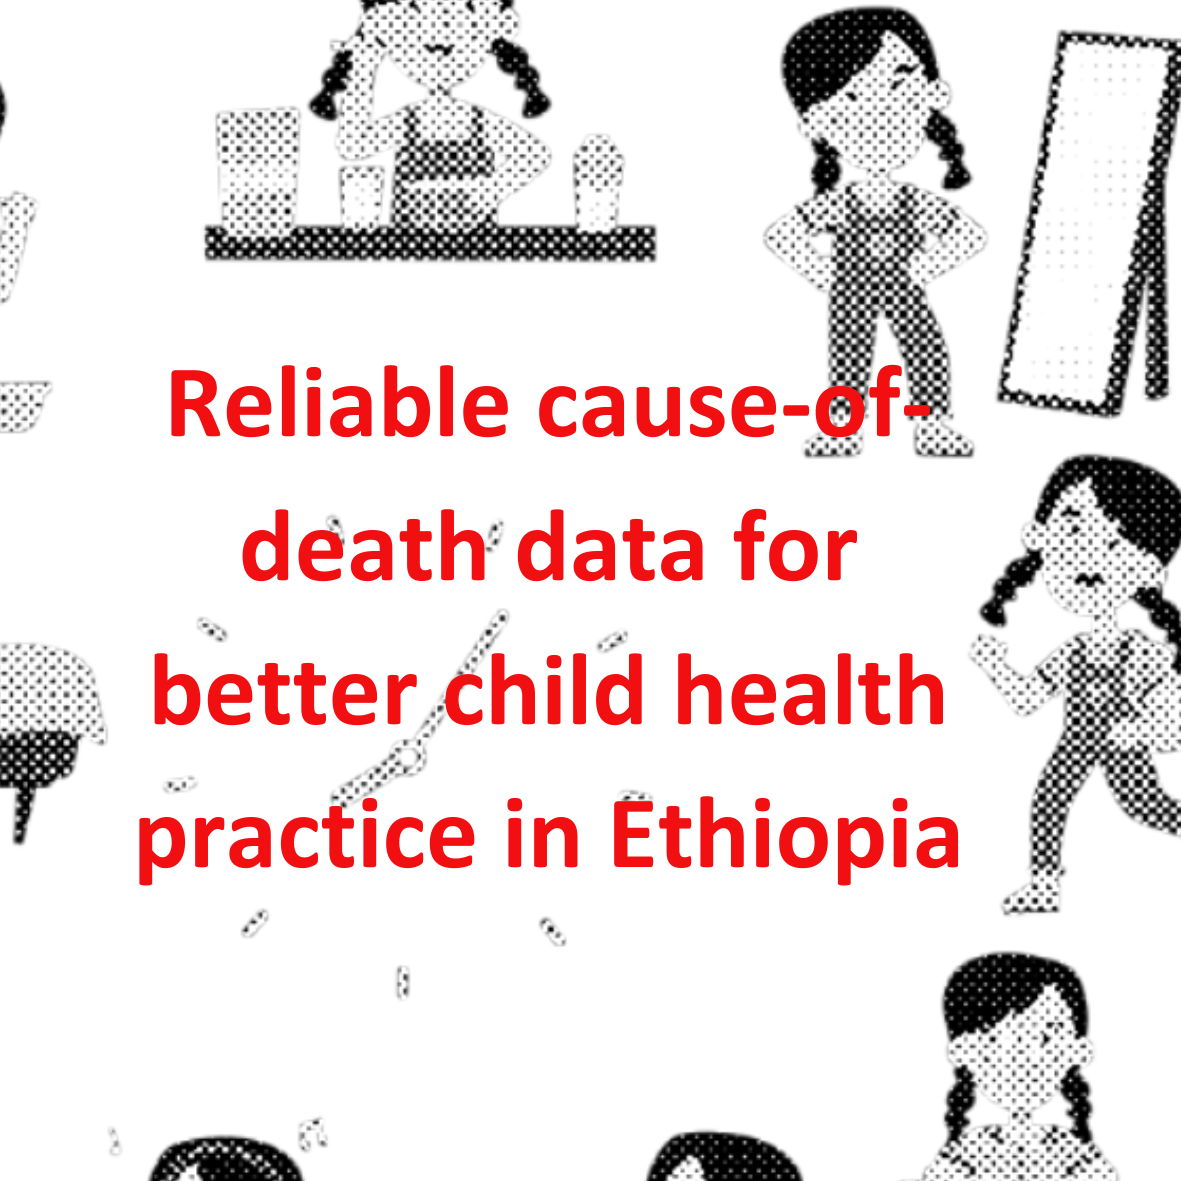 Reliable cause-of-death data for better child health practice  in Ethiopia